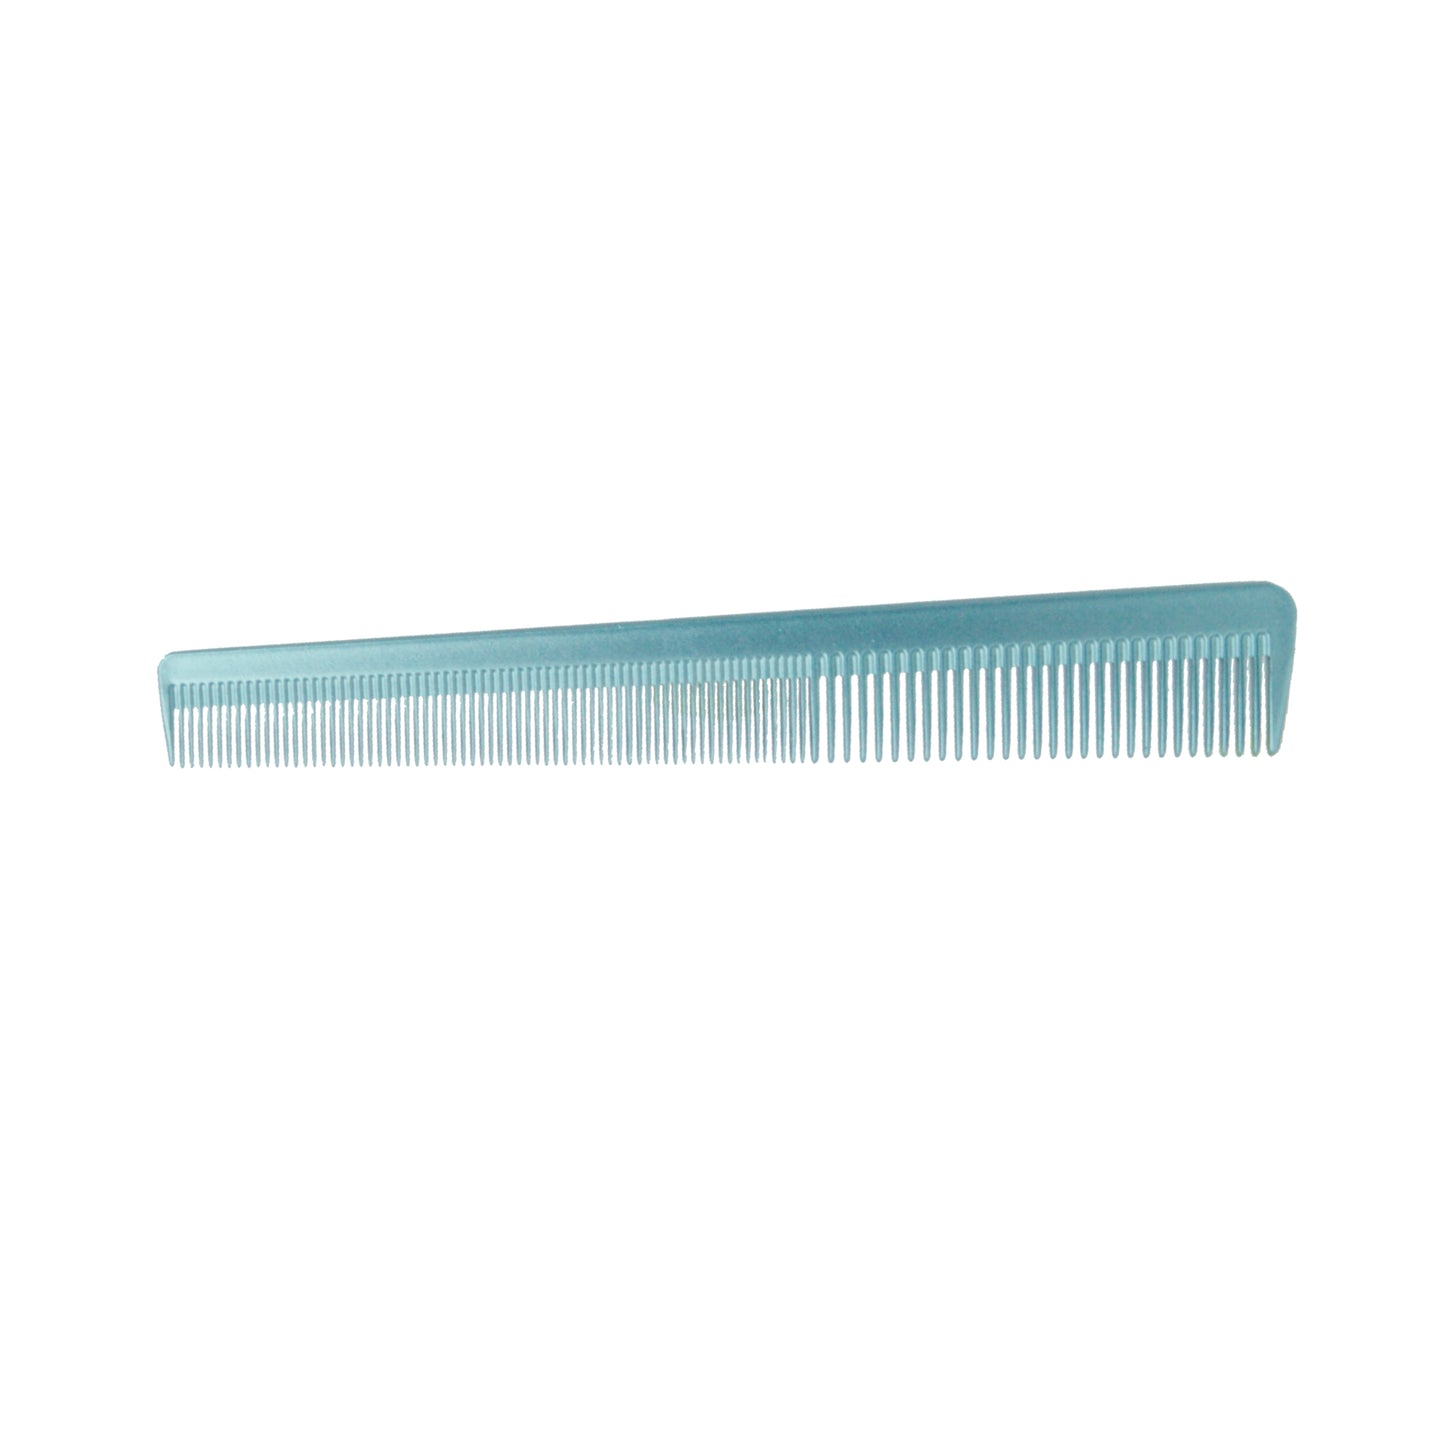 Pegasus MICOLOR 303, 6.5in Hard Rubber Heavy Barber Comb, Handmade, Seamless, Smooth Edges, Anti Static, Heat and Chemically Resistant, Wet Hair, Everyday Grooming Comb | Peines de goma dura - Blue